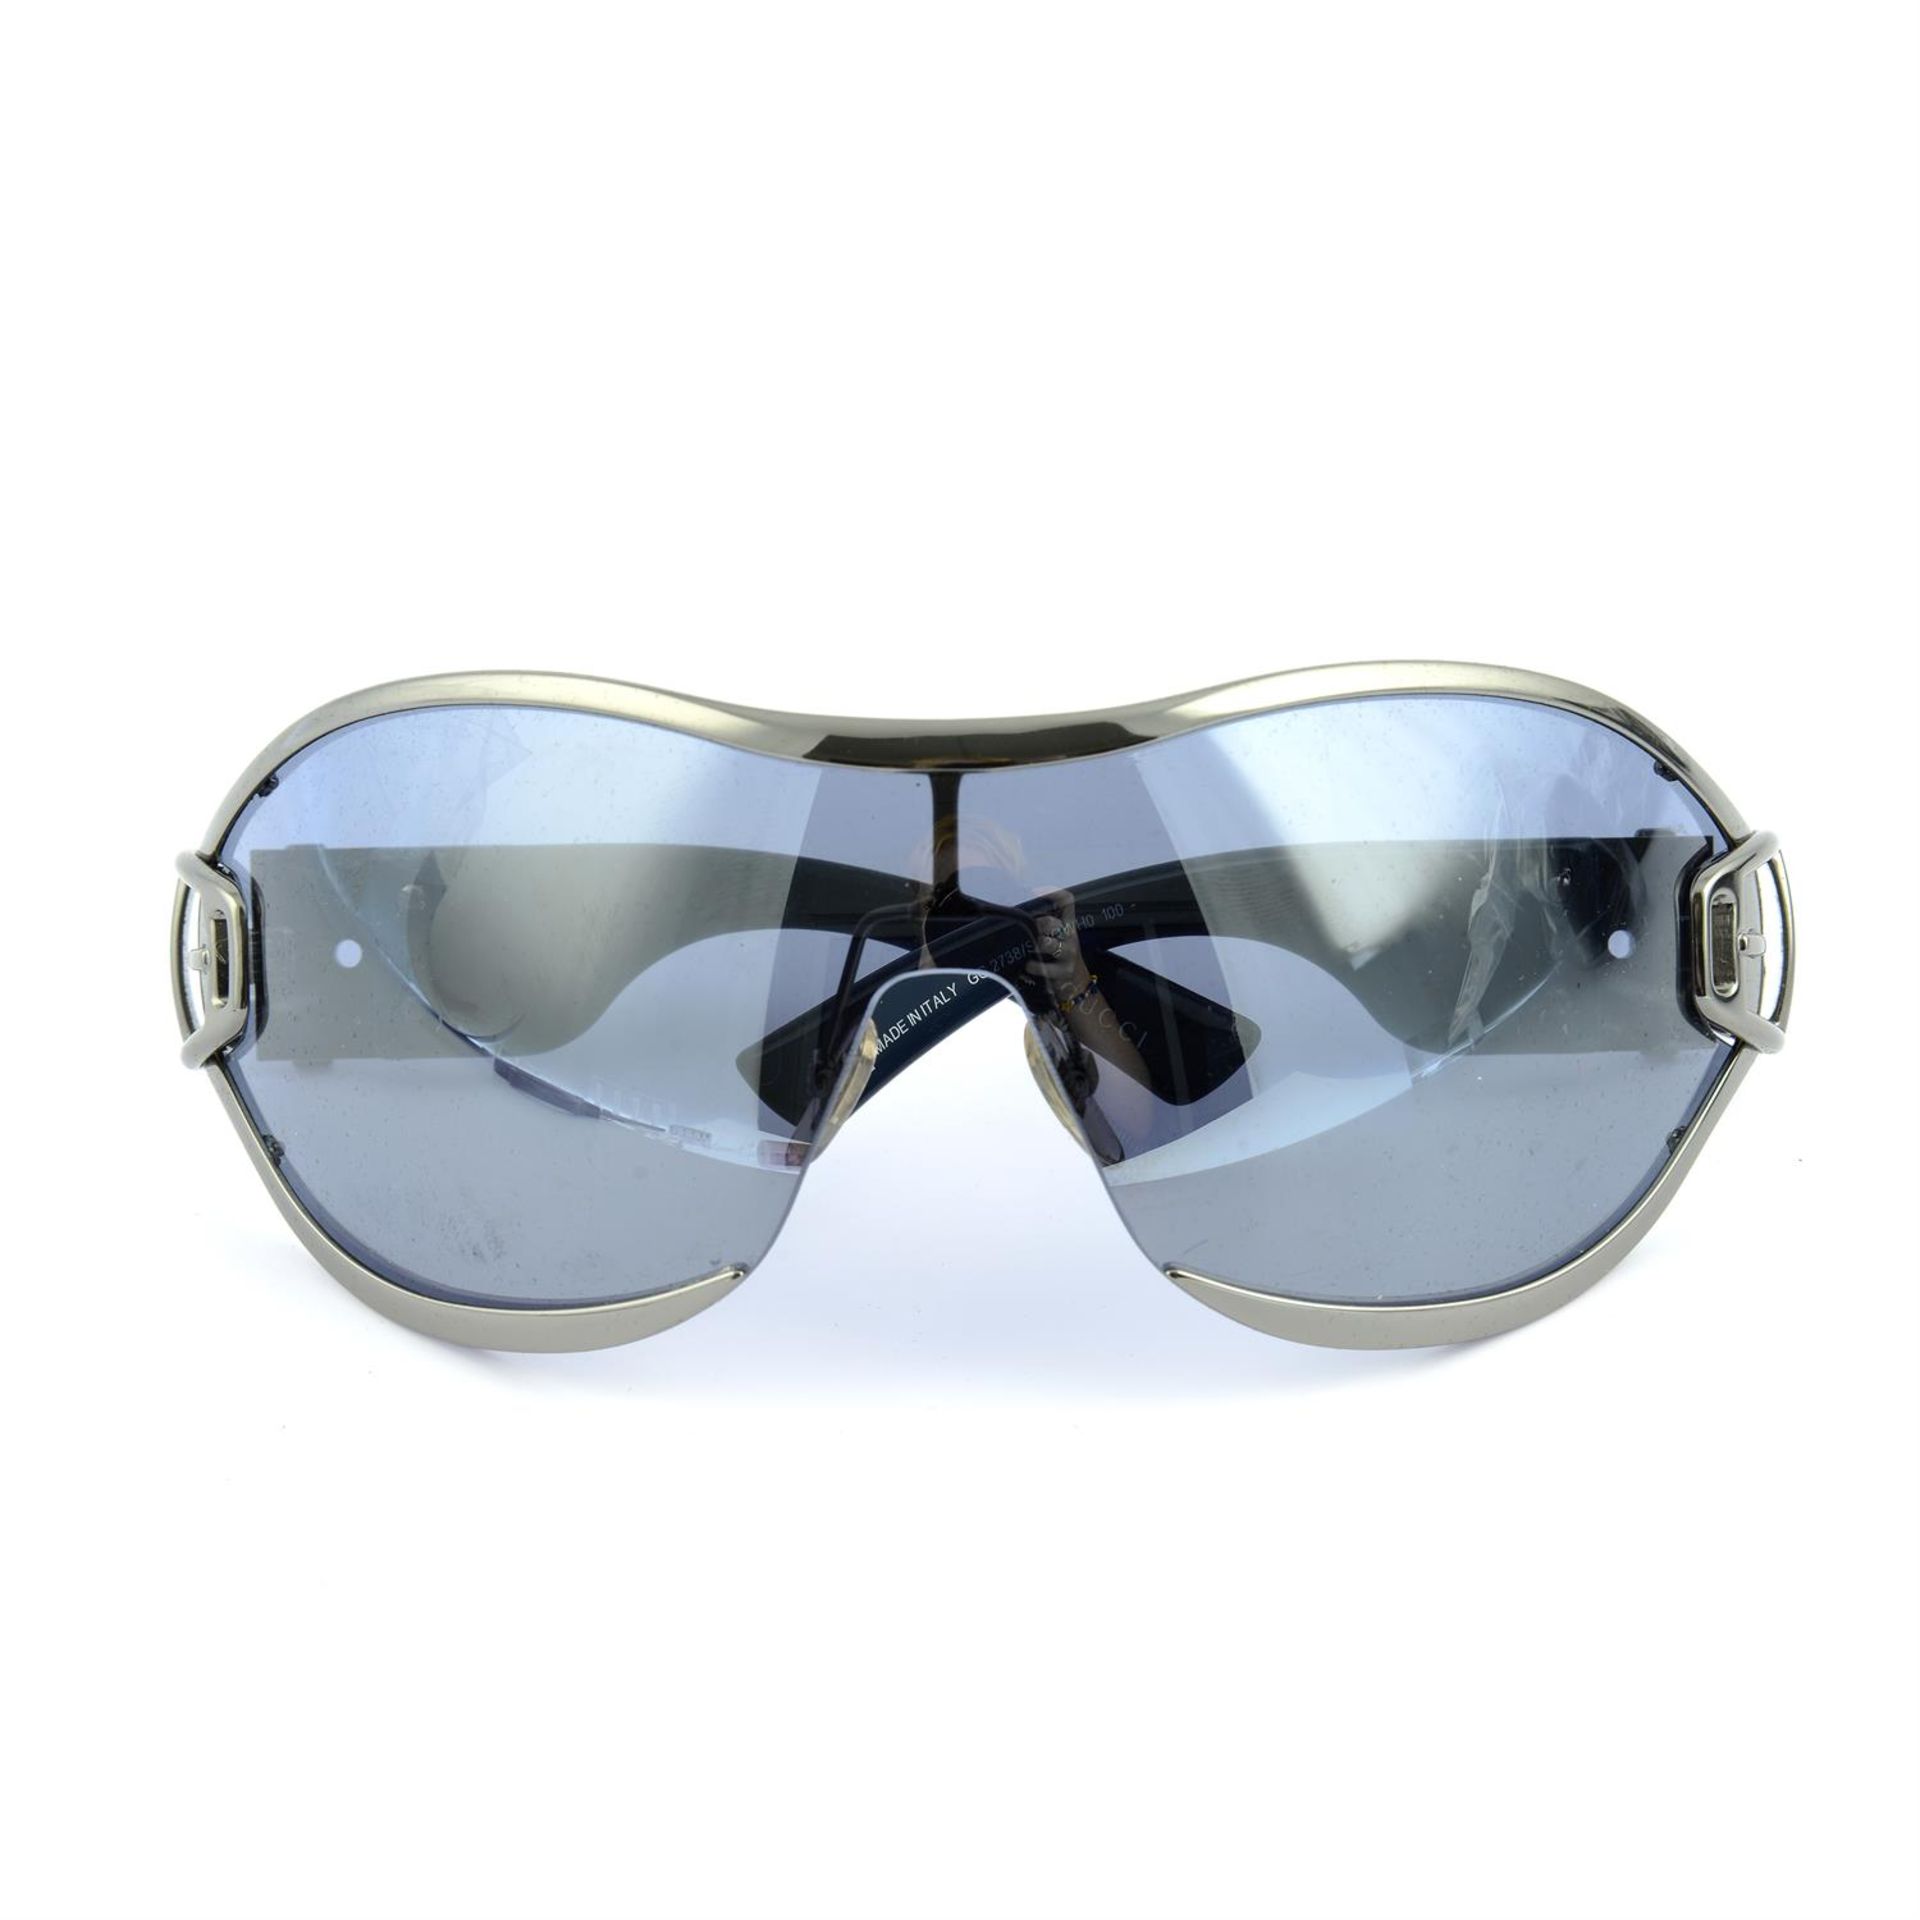 GUCCI - a pair of sunglasses.